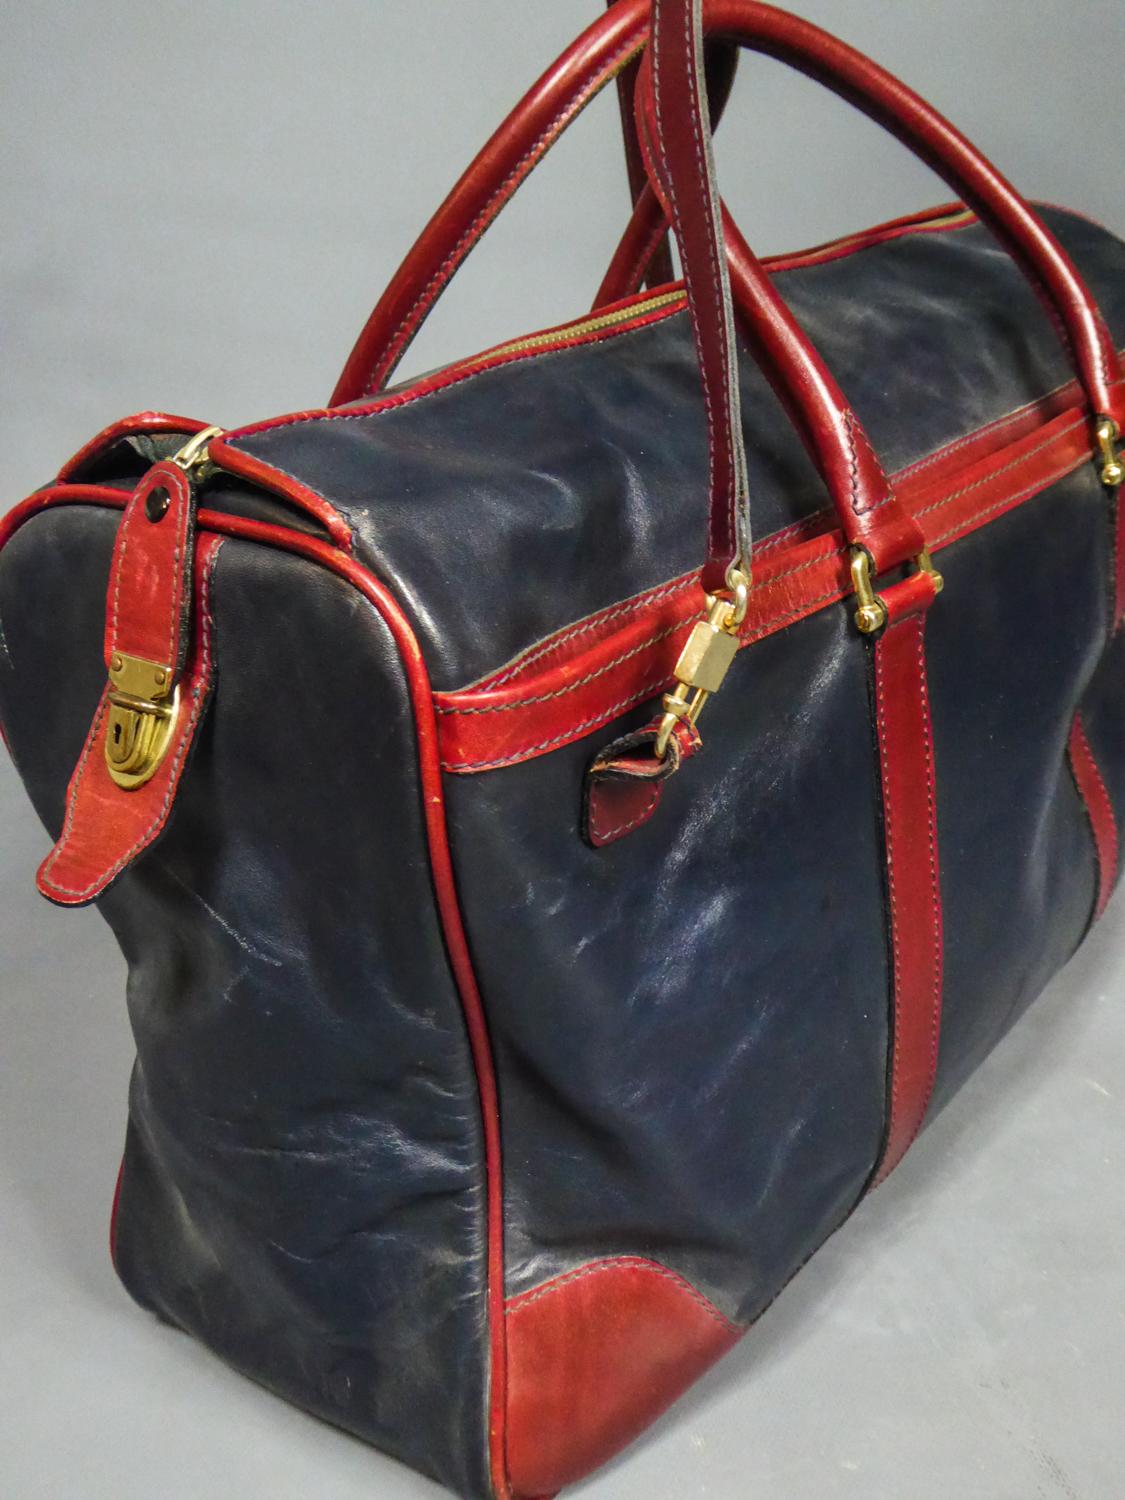 Circa 1980
France

Travel or Weekend bag in two-tone leather from the luxury leather goods designer house Clément in Lyon and dating from the 1980s. Beautiful luxury collection item from French tradition in supple, waxed burgundy and navy blue